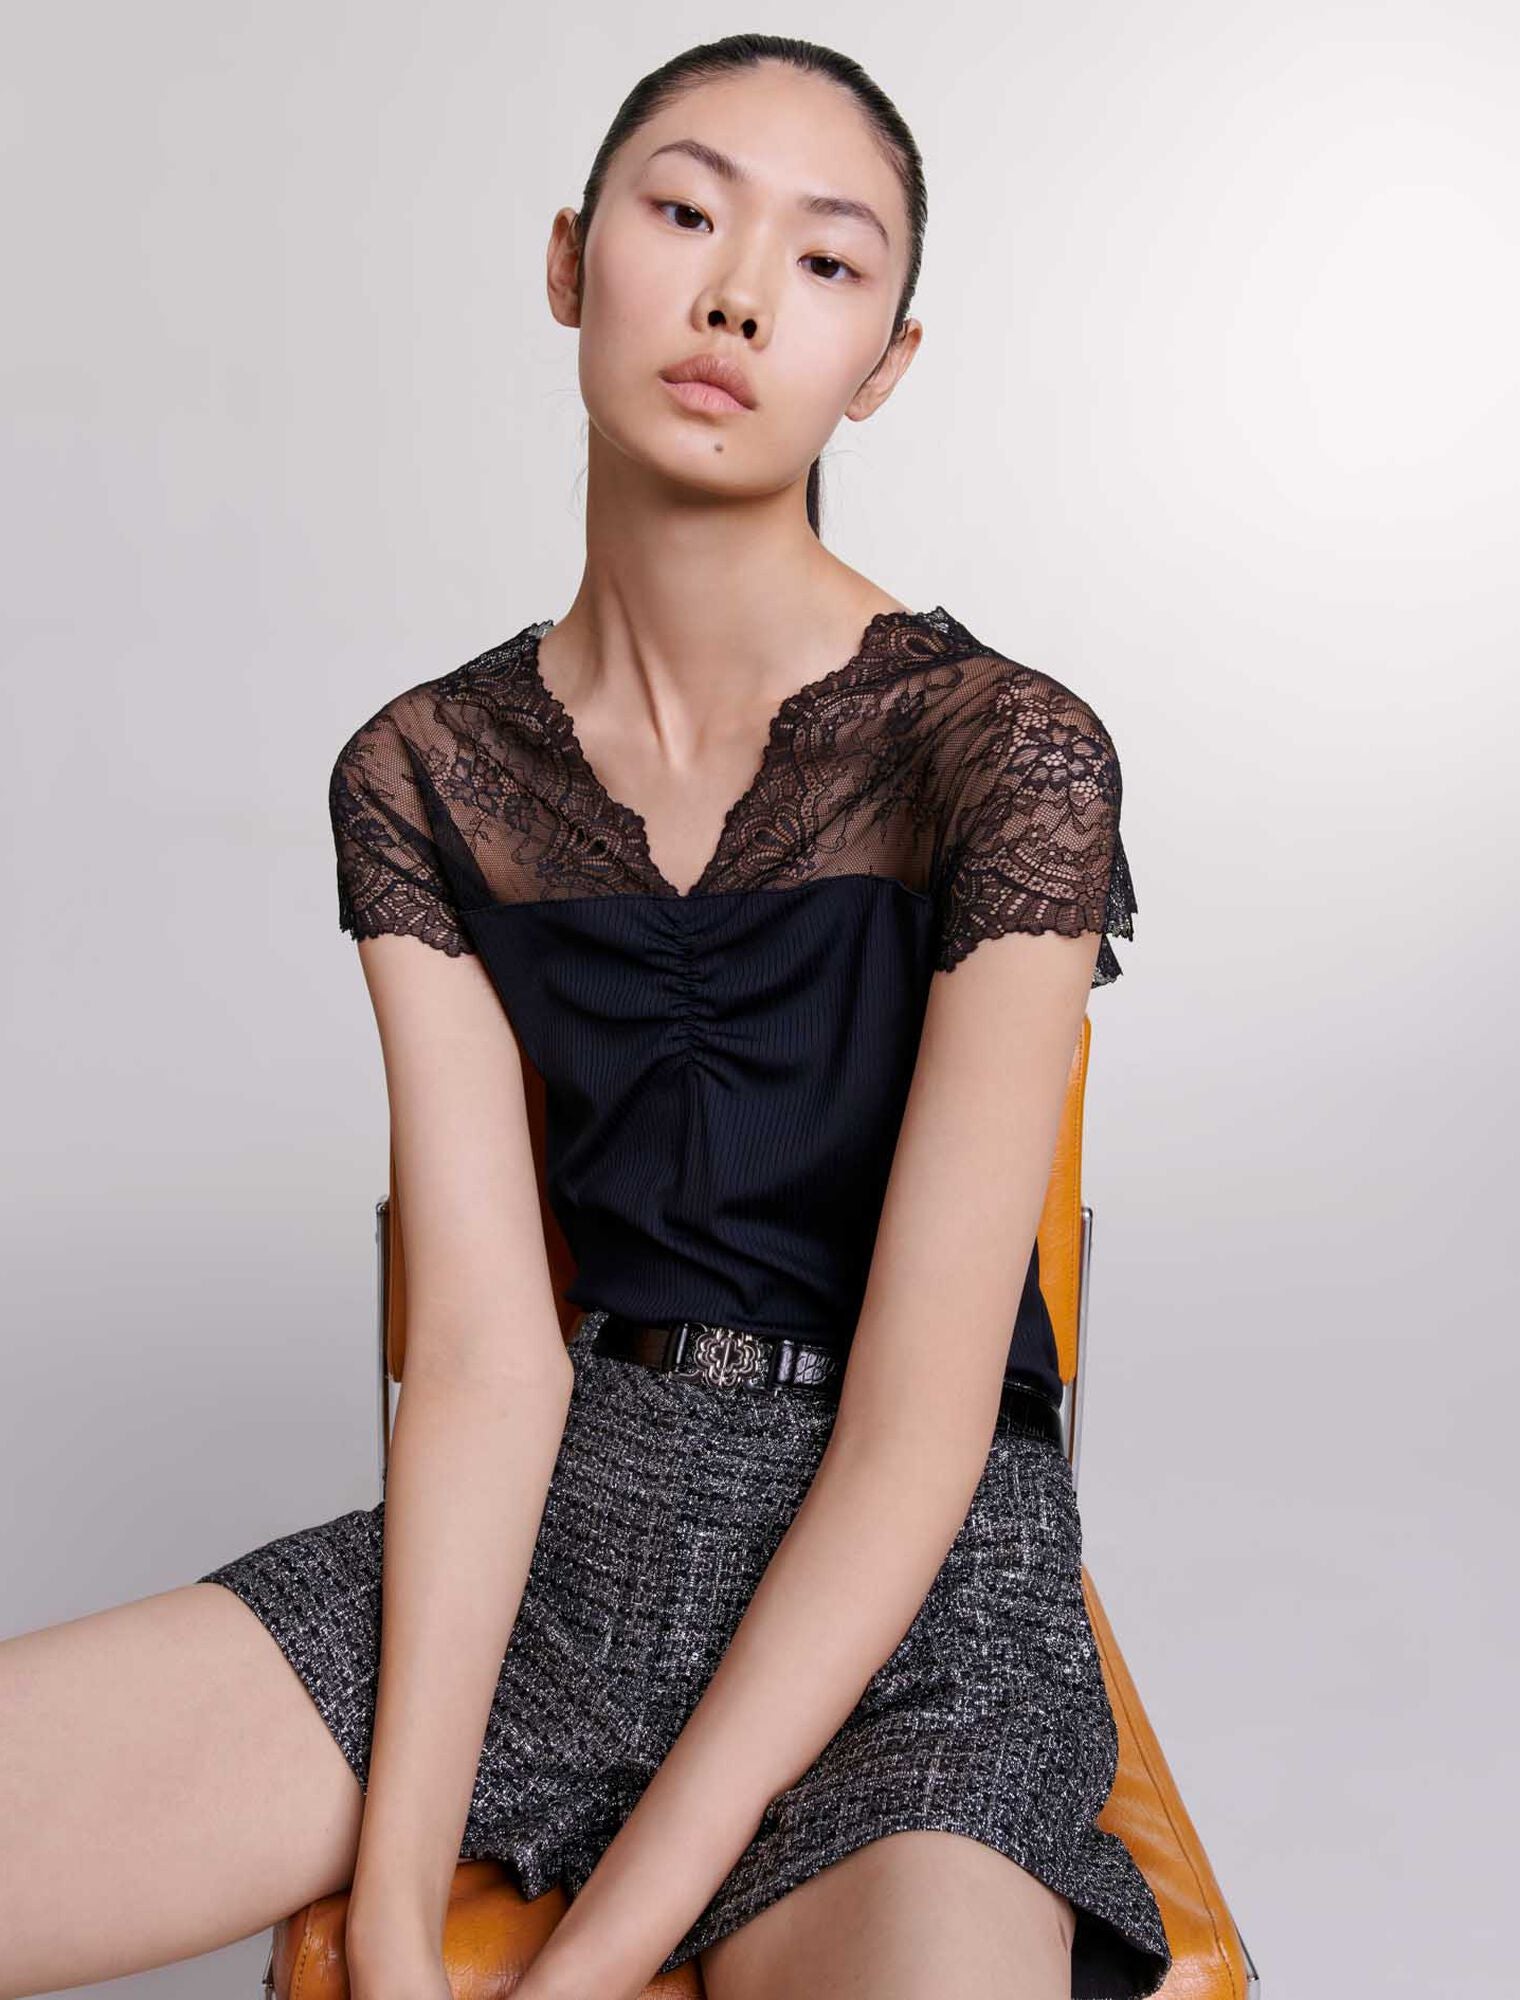 Black-Jersey Top With Lace Trim